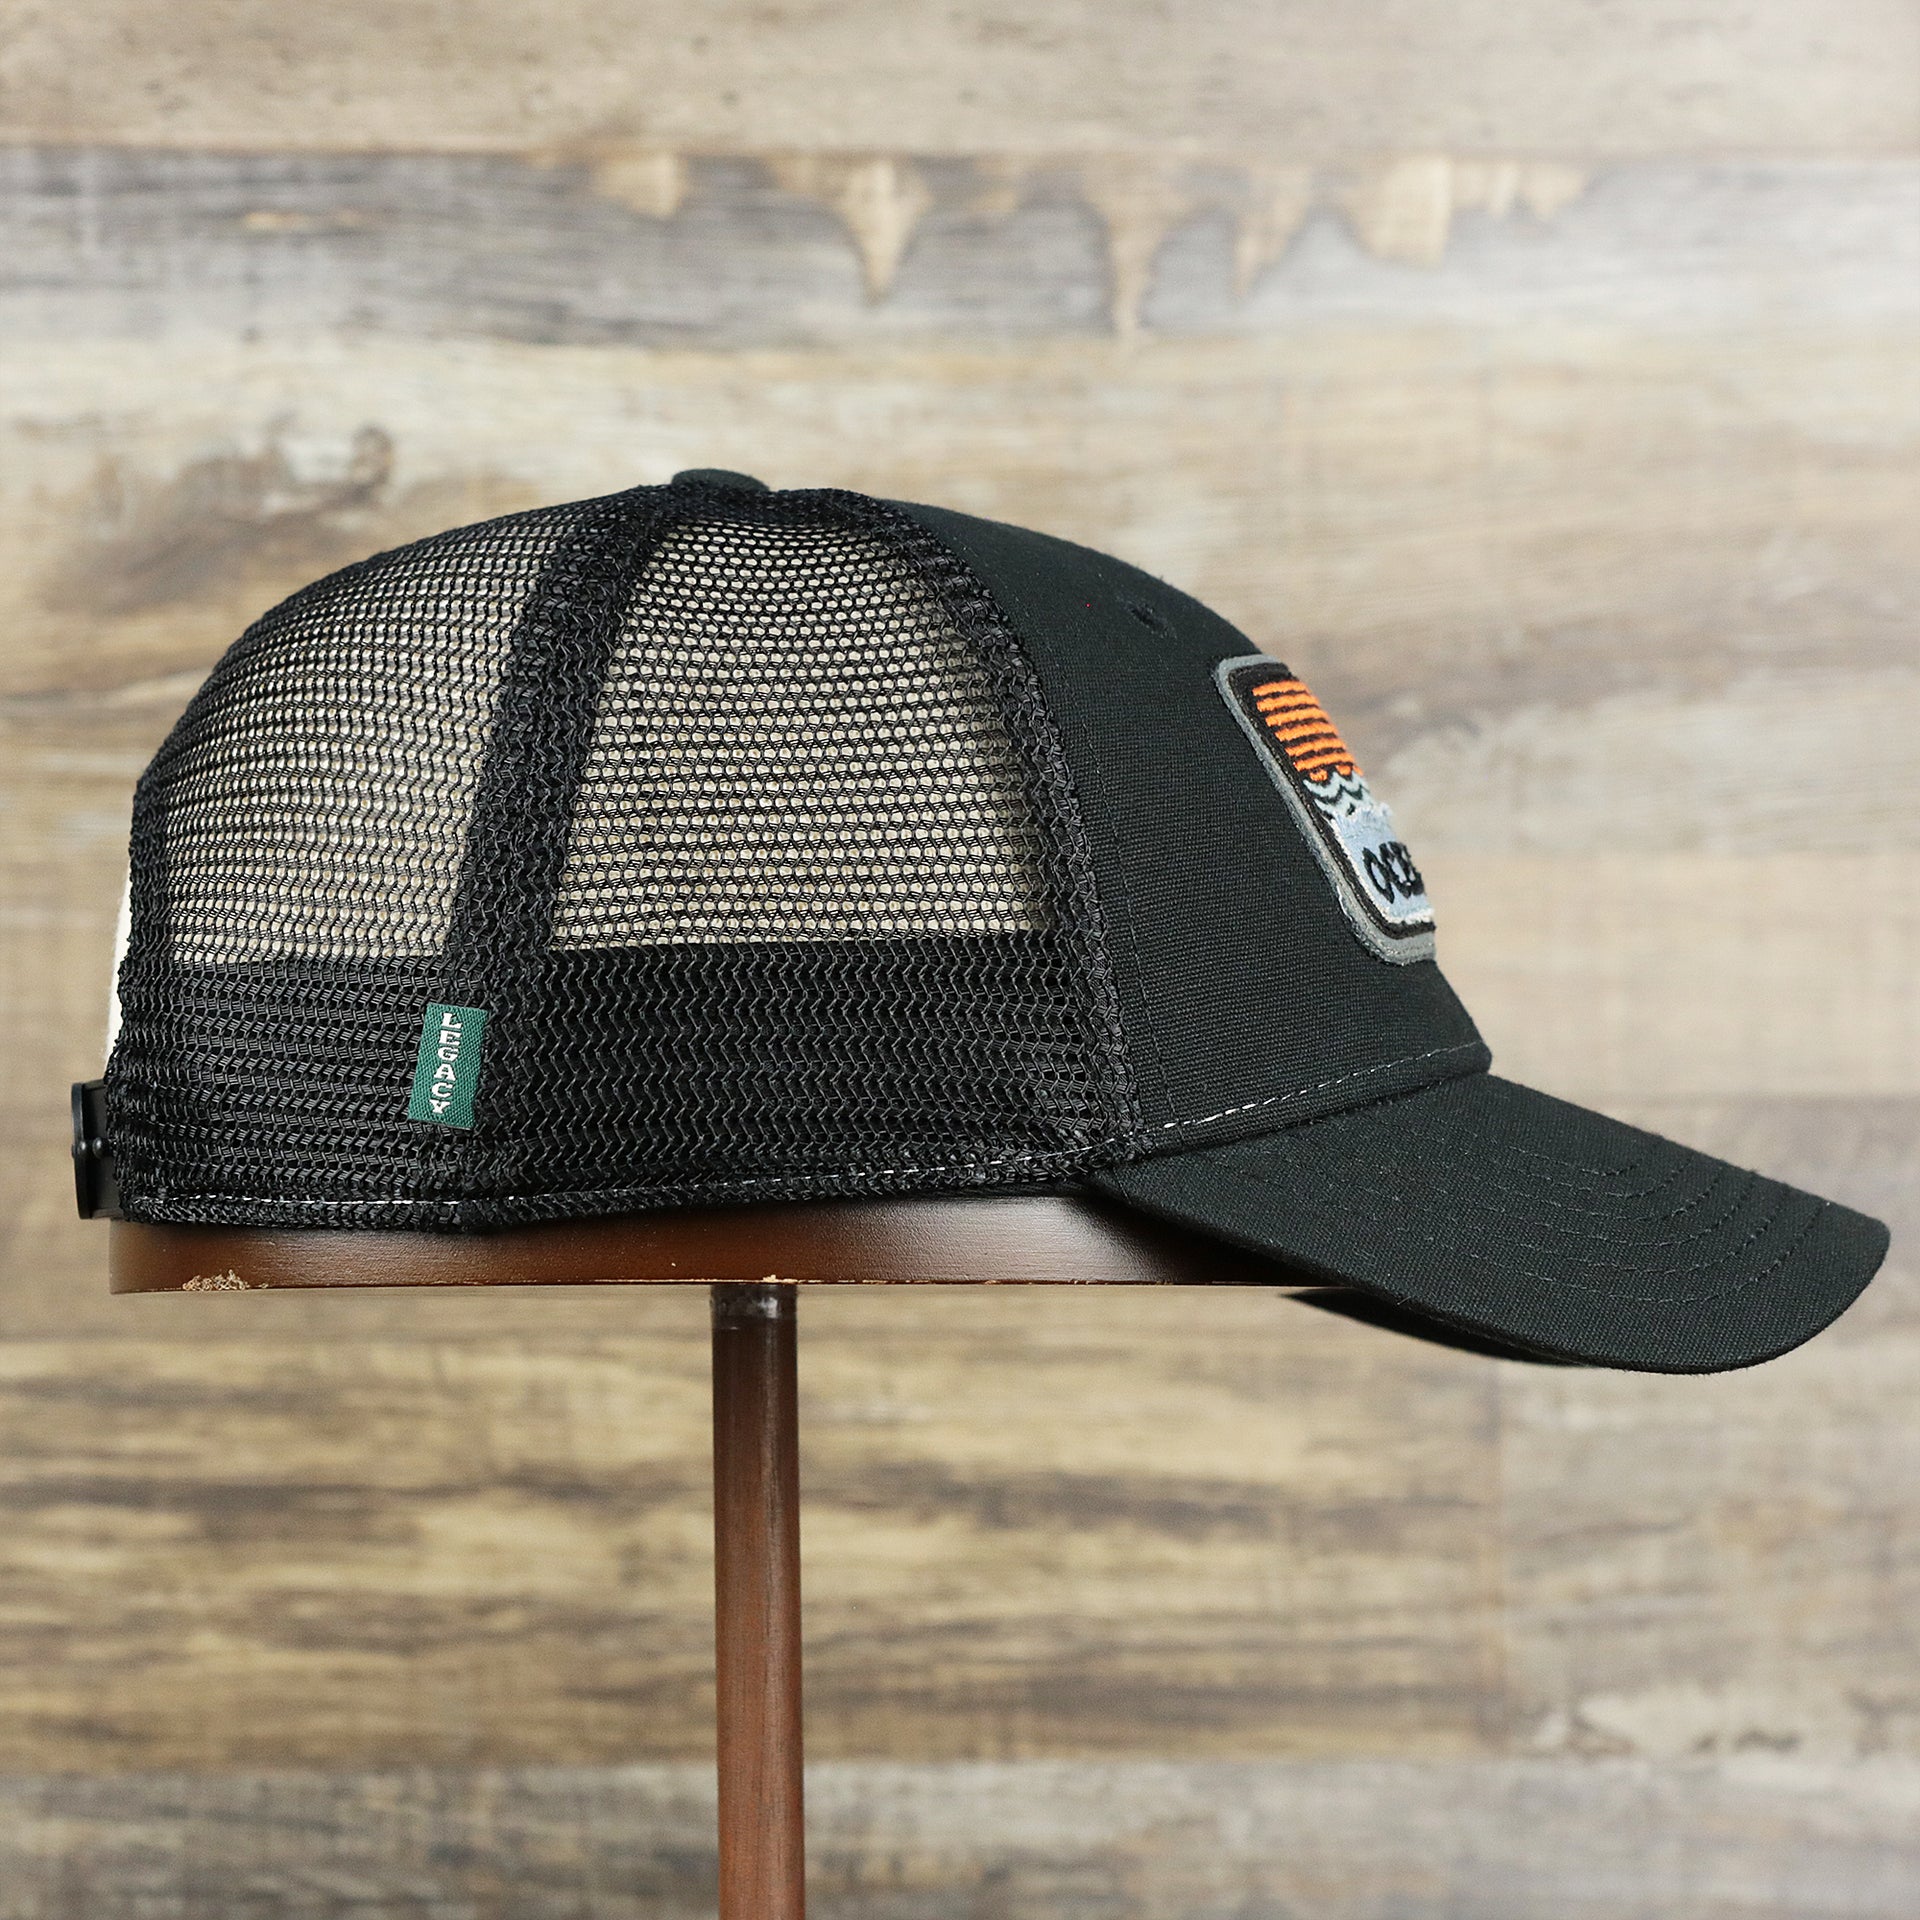 The wearer's right on the Youth New Jersey Ocean City Sunset Mesh Back Trucker Hat | Black And Black Mesh Youth Trucker Hat